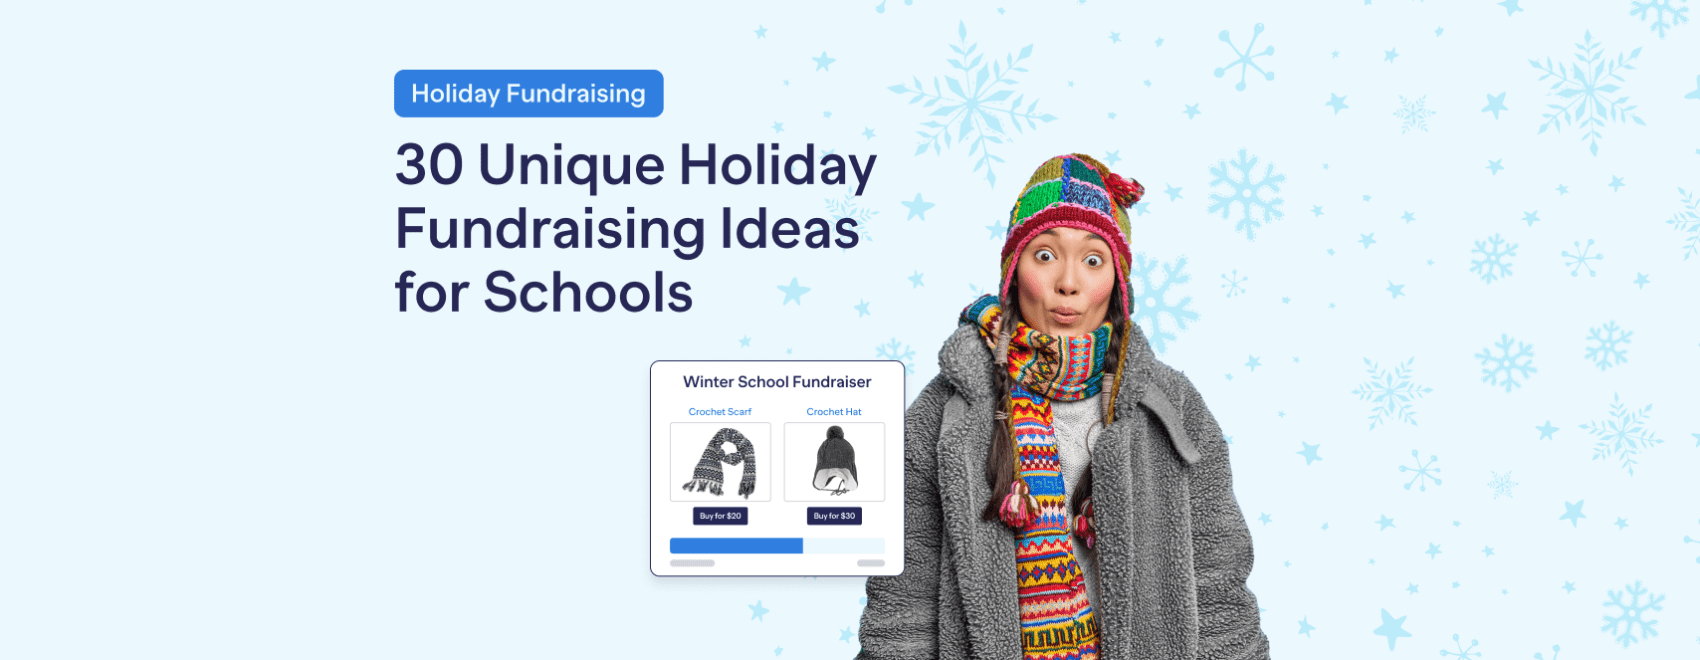 Holiday Fundraising Ideas for Schools